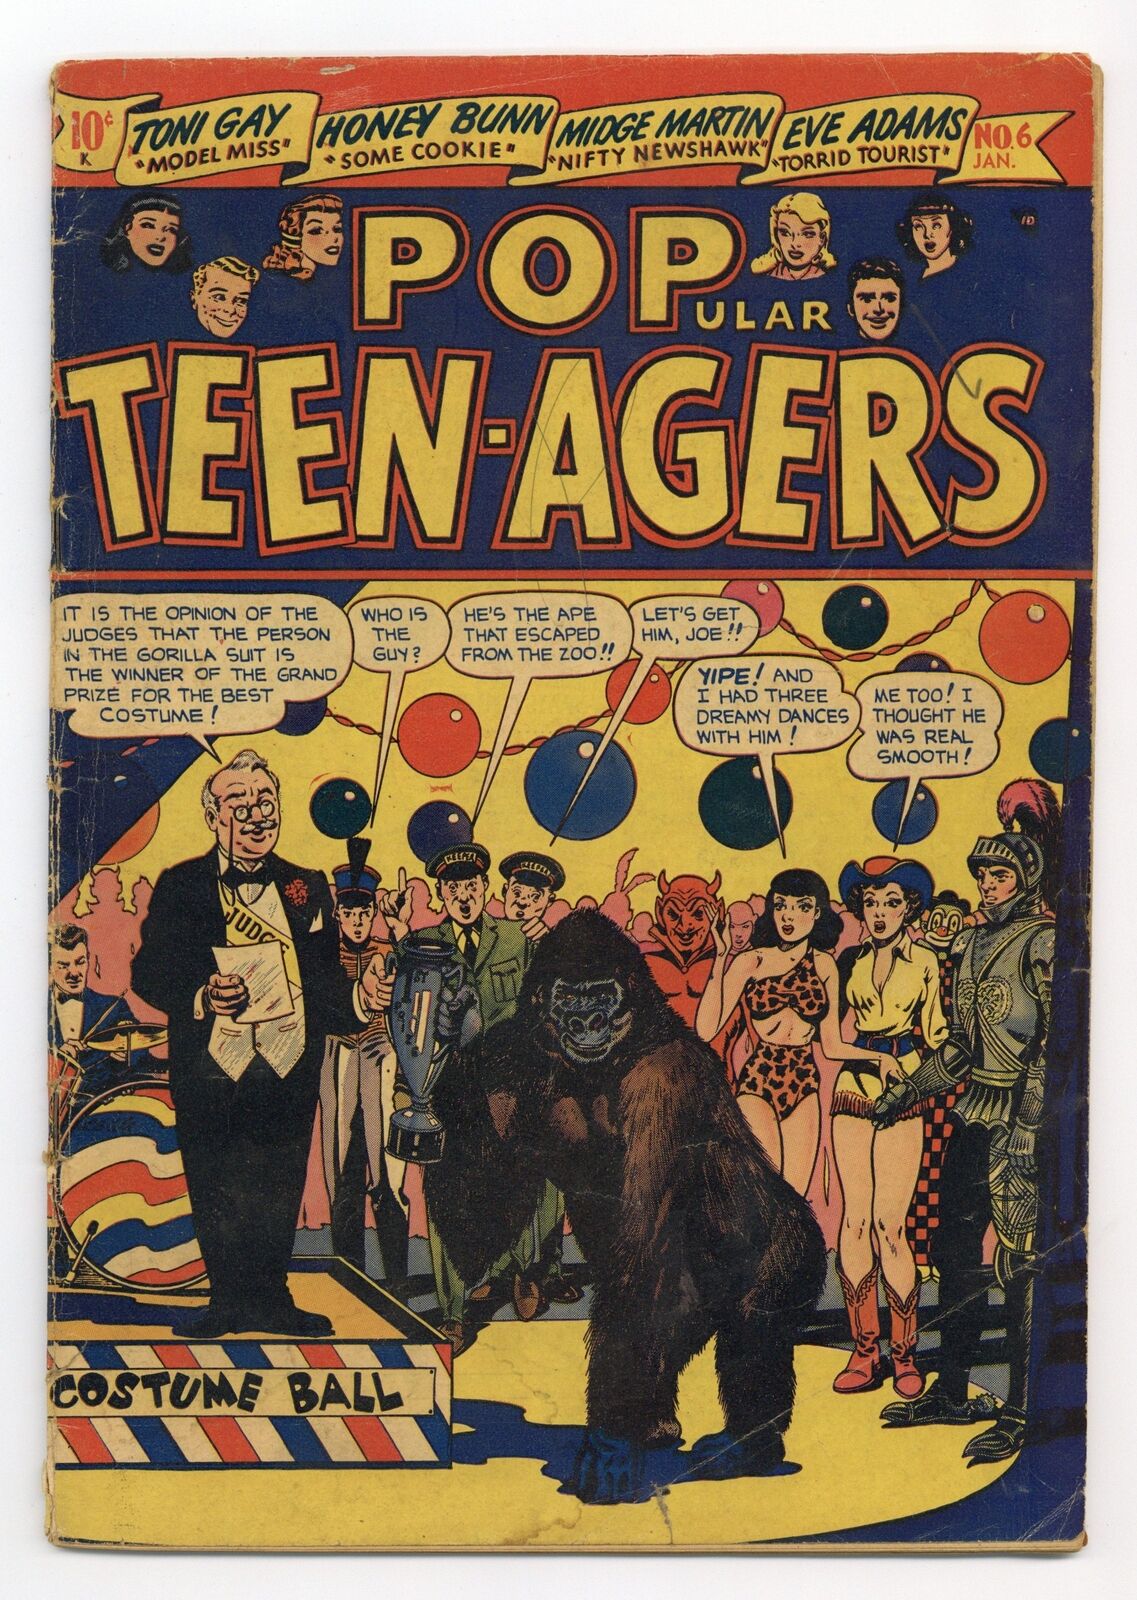 Popular Teen-Agers #6 GD+ 2.5 1950 Star Publications